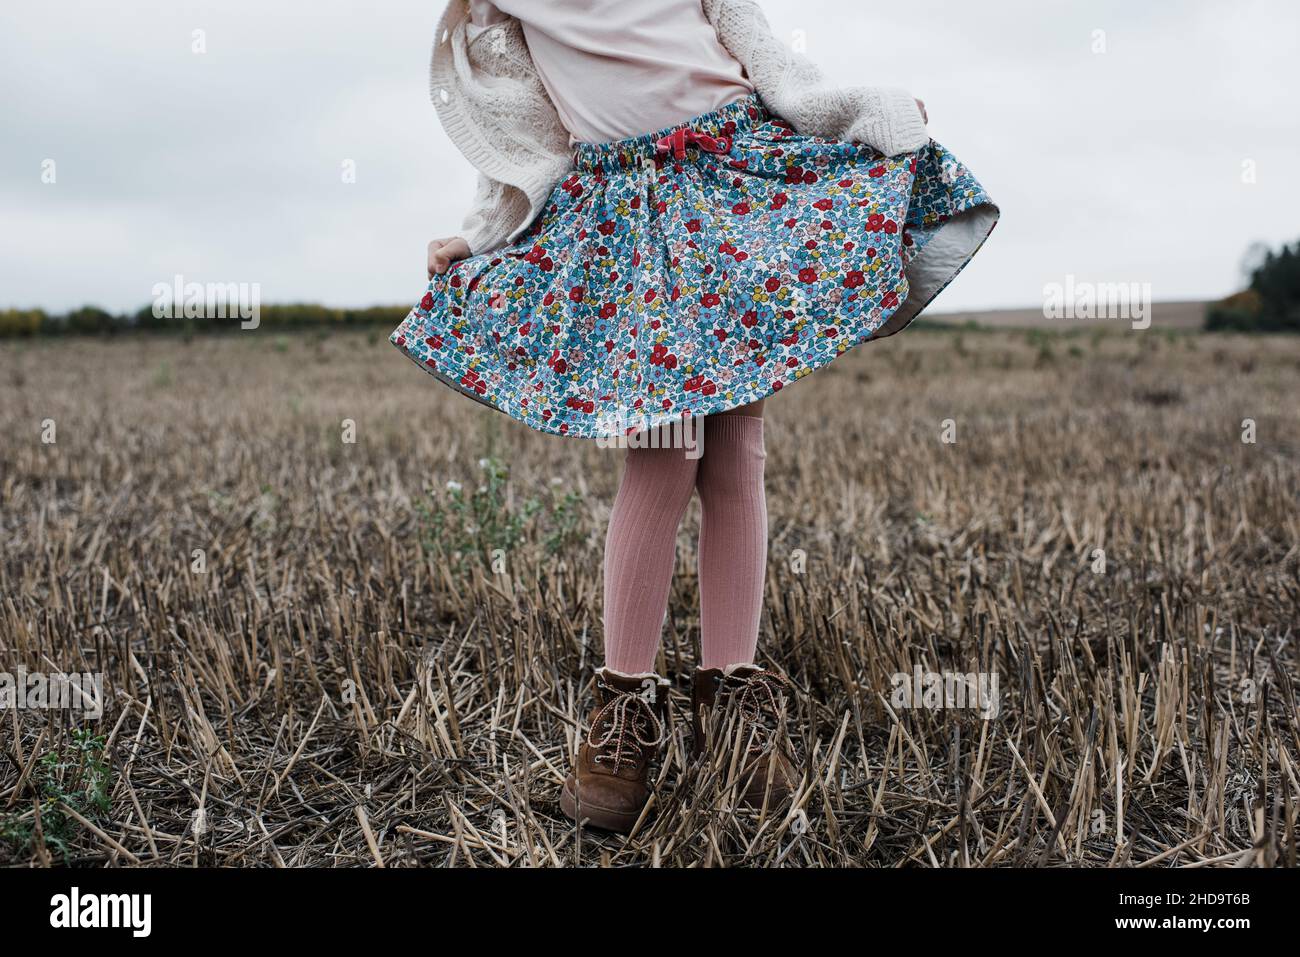 girl doing a curtsy whilst playing outside in a field Stock Photo